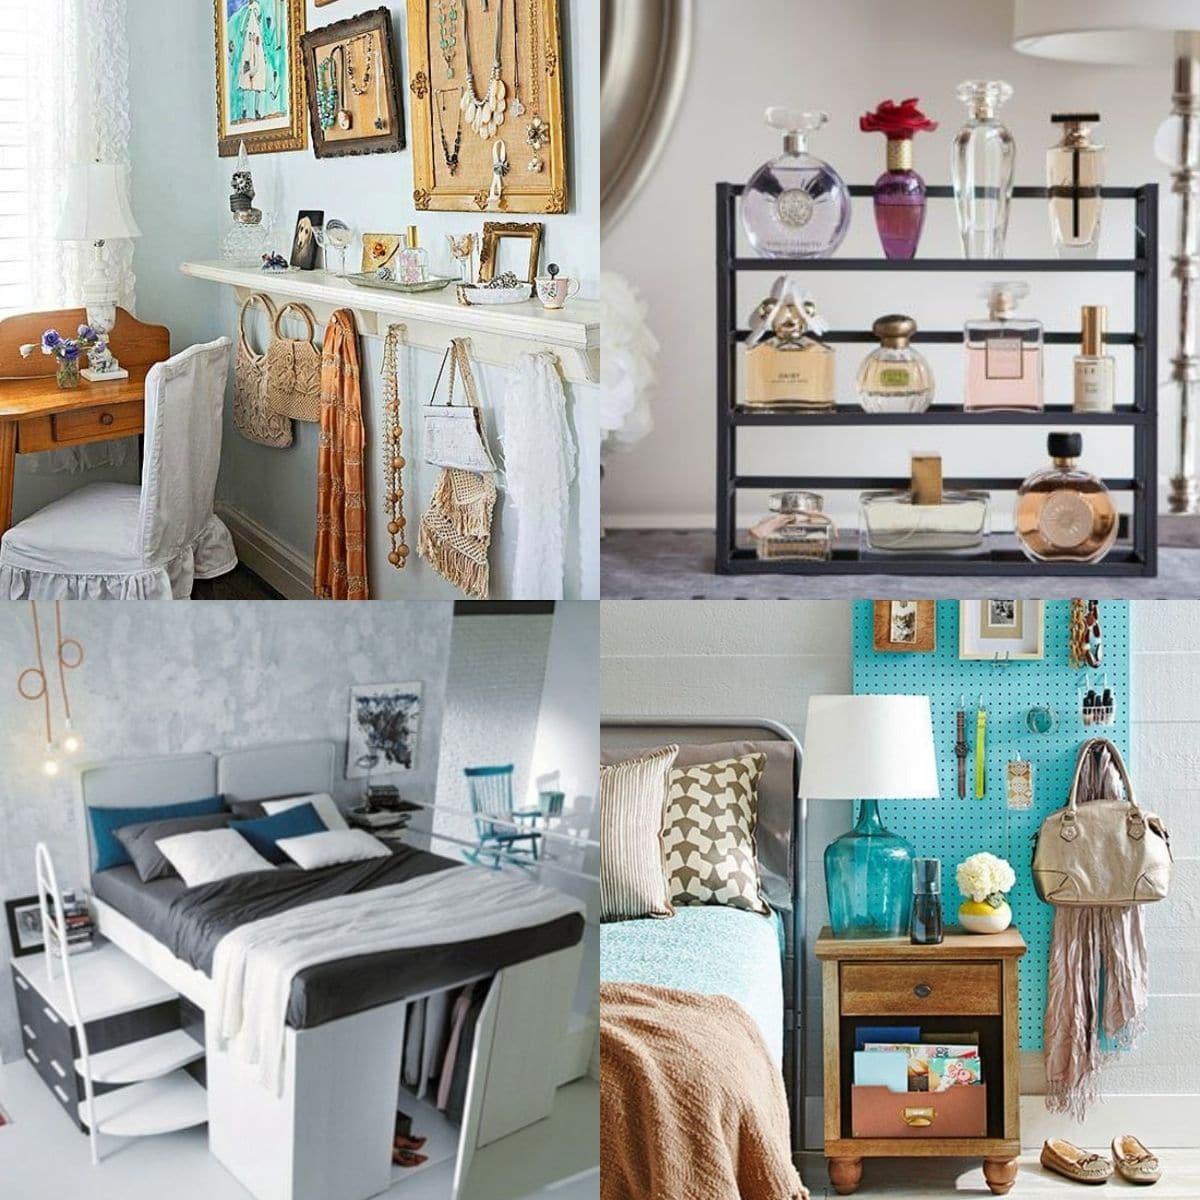 Increase storage in your small rooms with the fun hacks.

Keep your room both organized and stylish. 😉

#Storage #StorageIDeas #StorageSpace #SmallRooms #SmallRoomStorage #SmallRoomStorageIDeas

 LocalInfoForYou.com/373414/small-r…